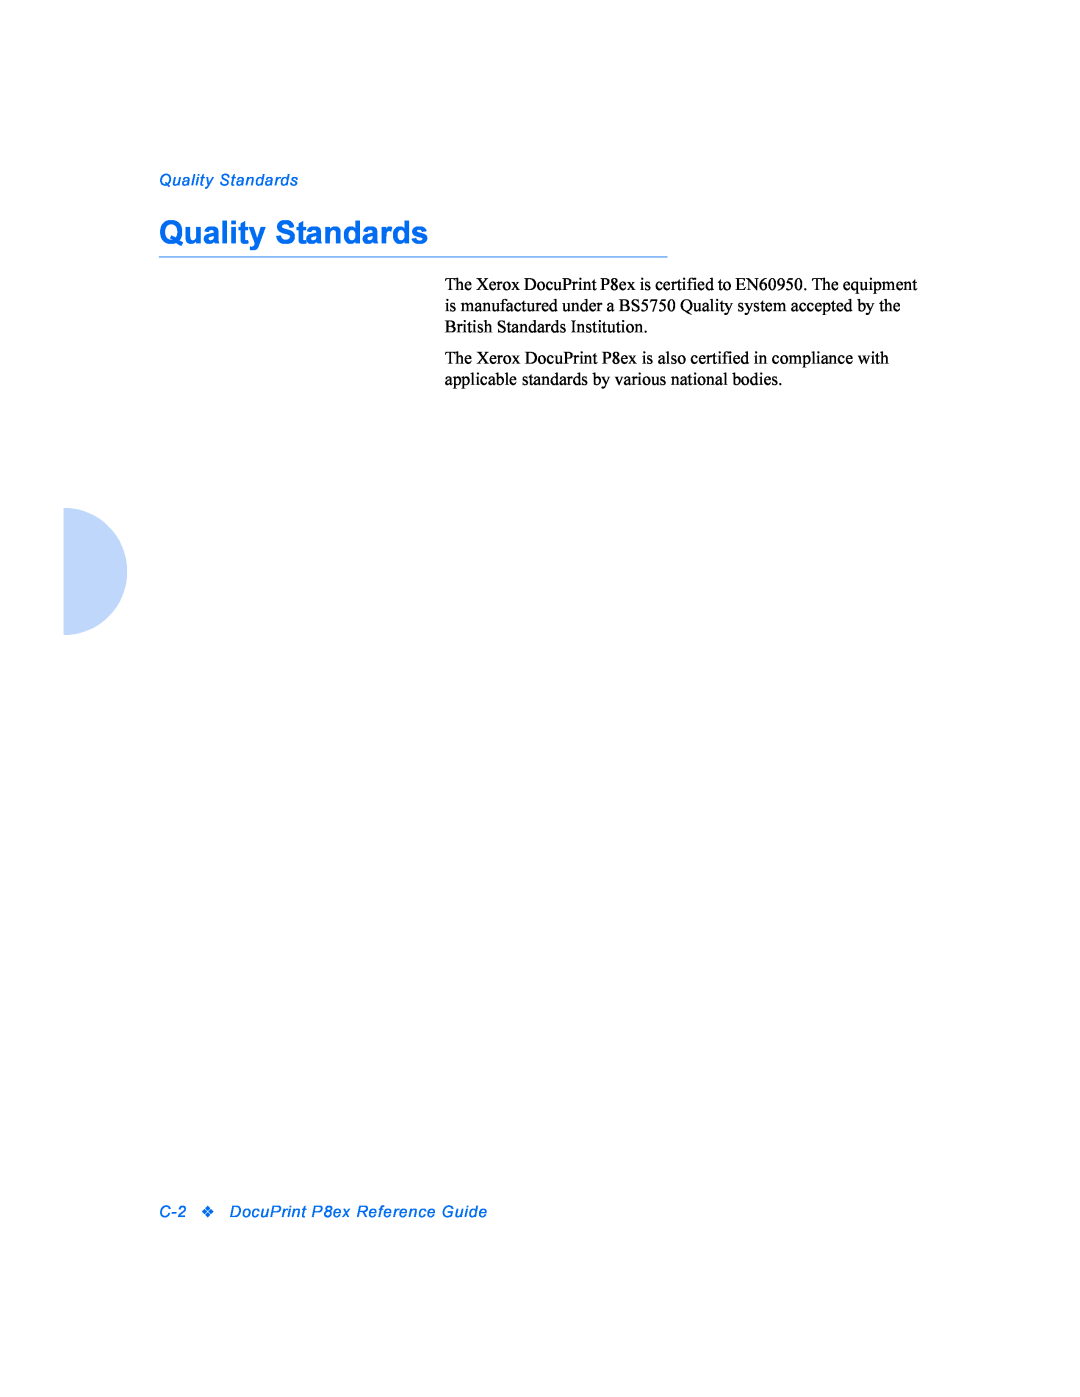 Xerox manual Quality Standards, C-2DocuPrint P8ex Reference Guide 